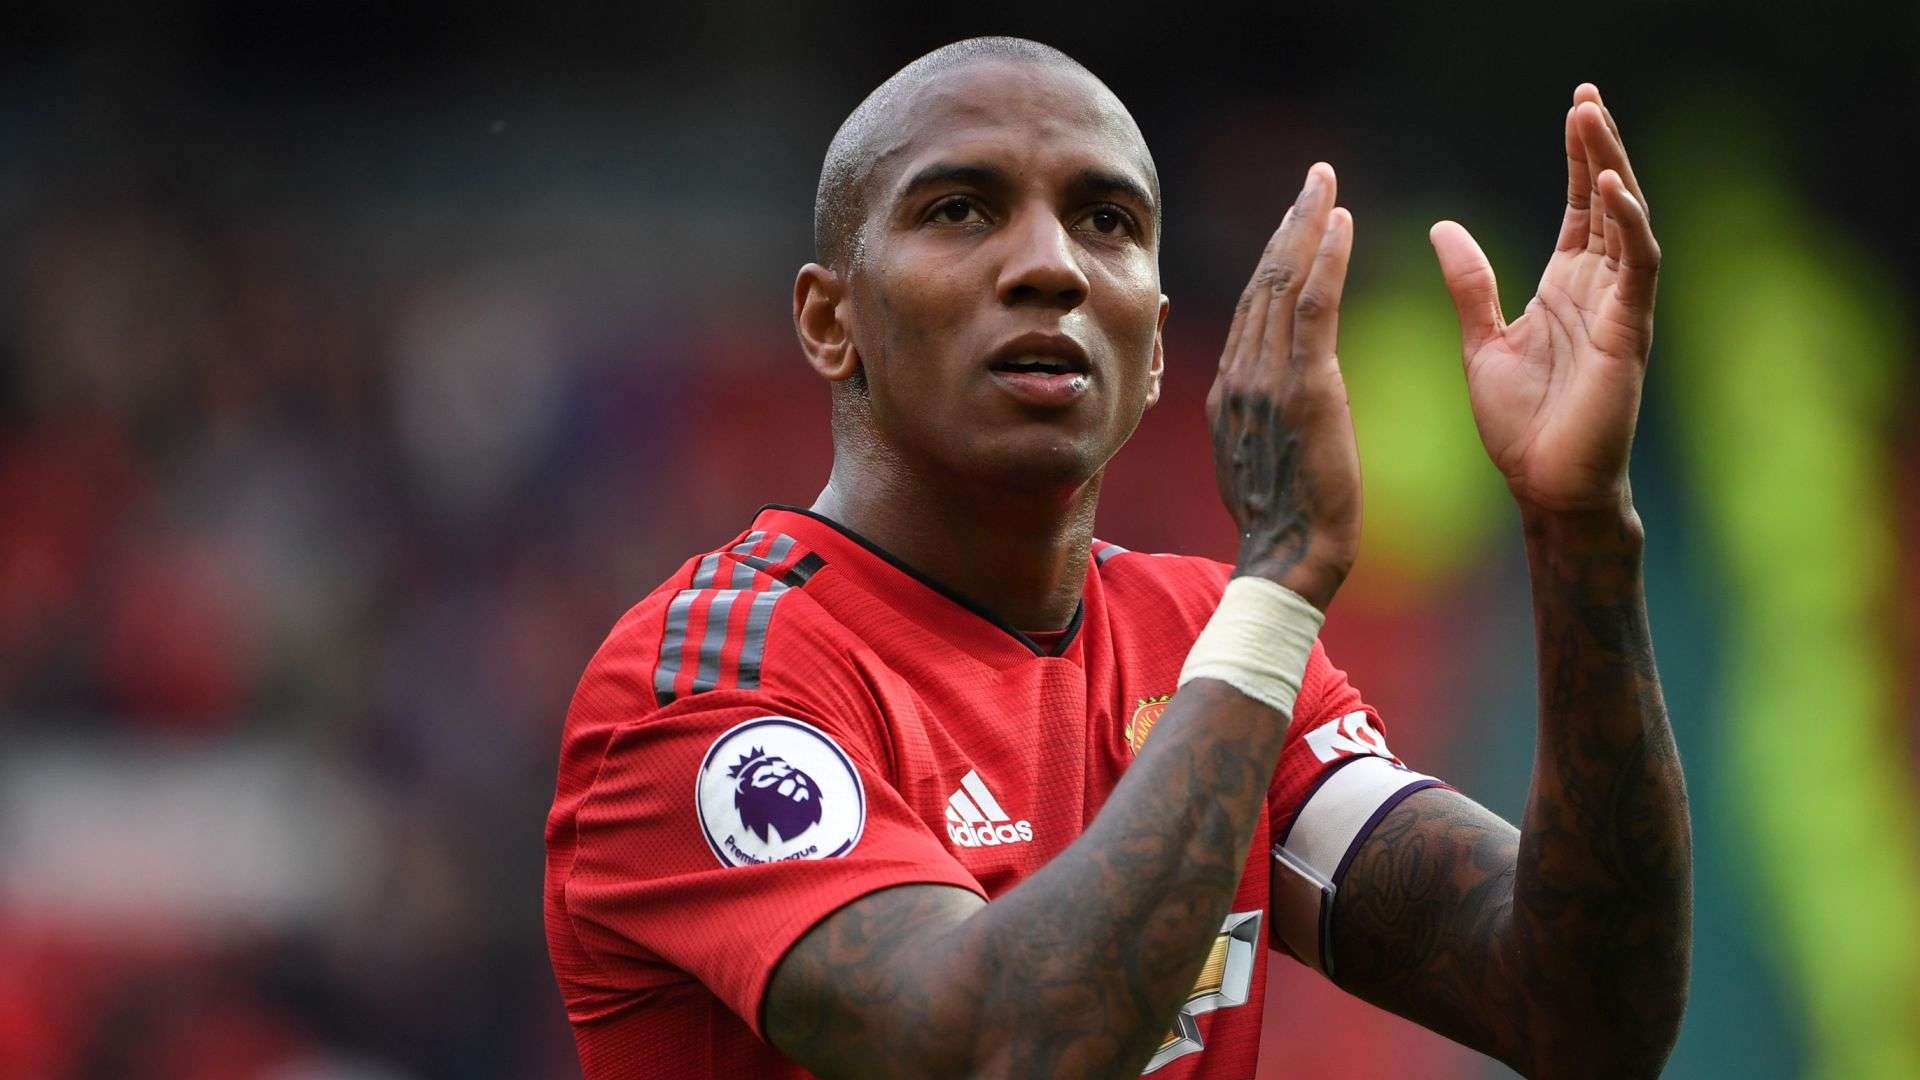 Ashley Young - Manchester United